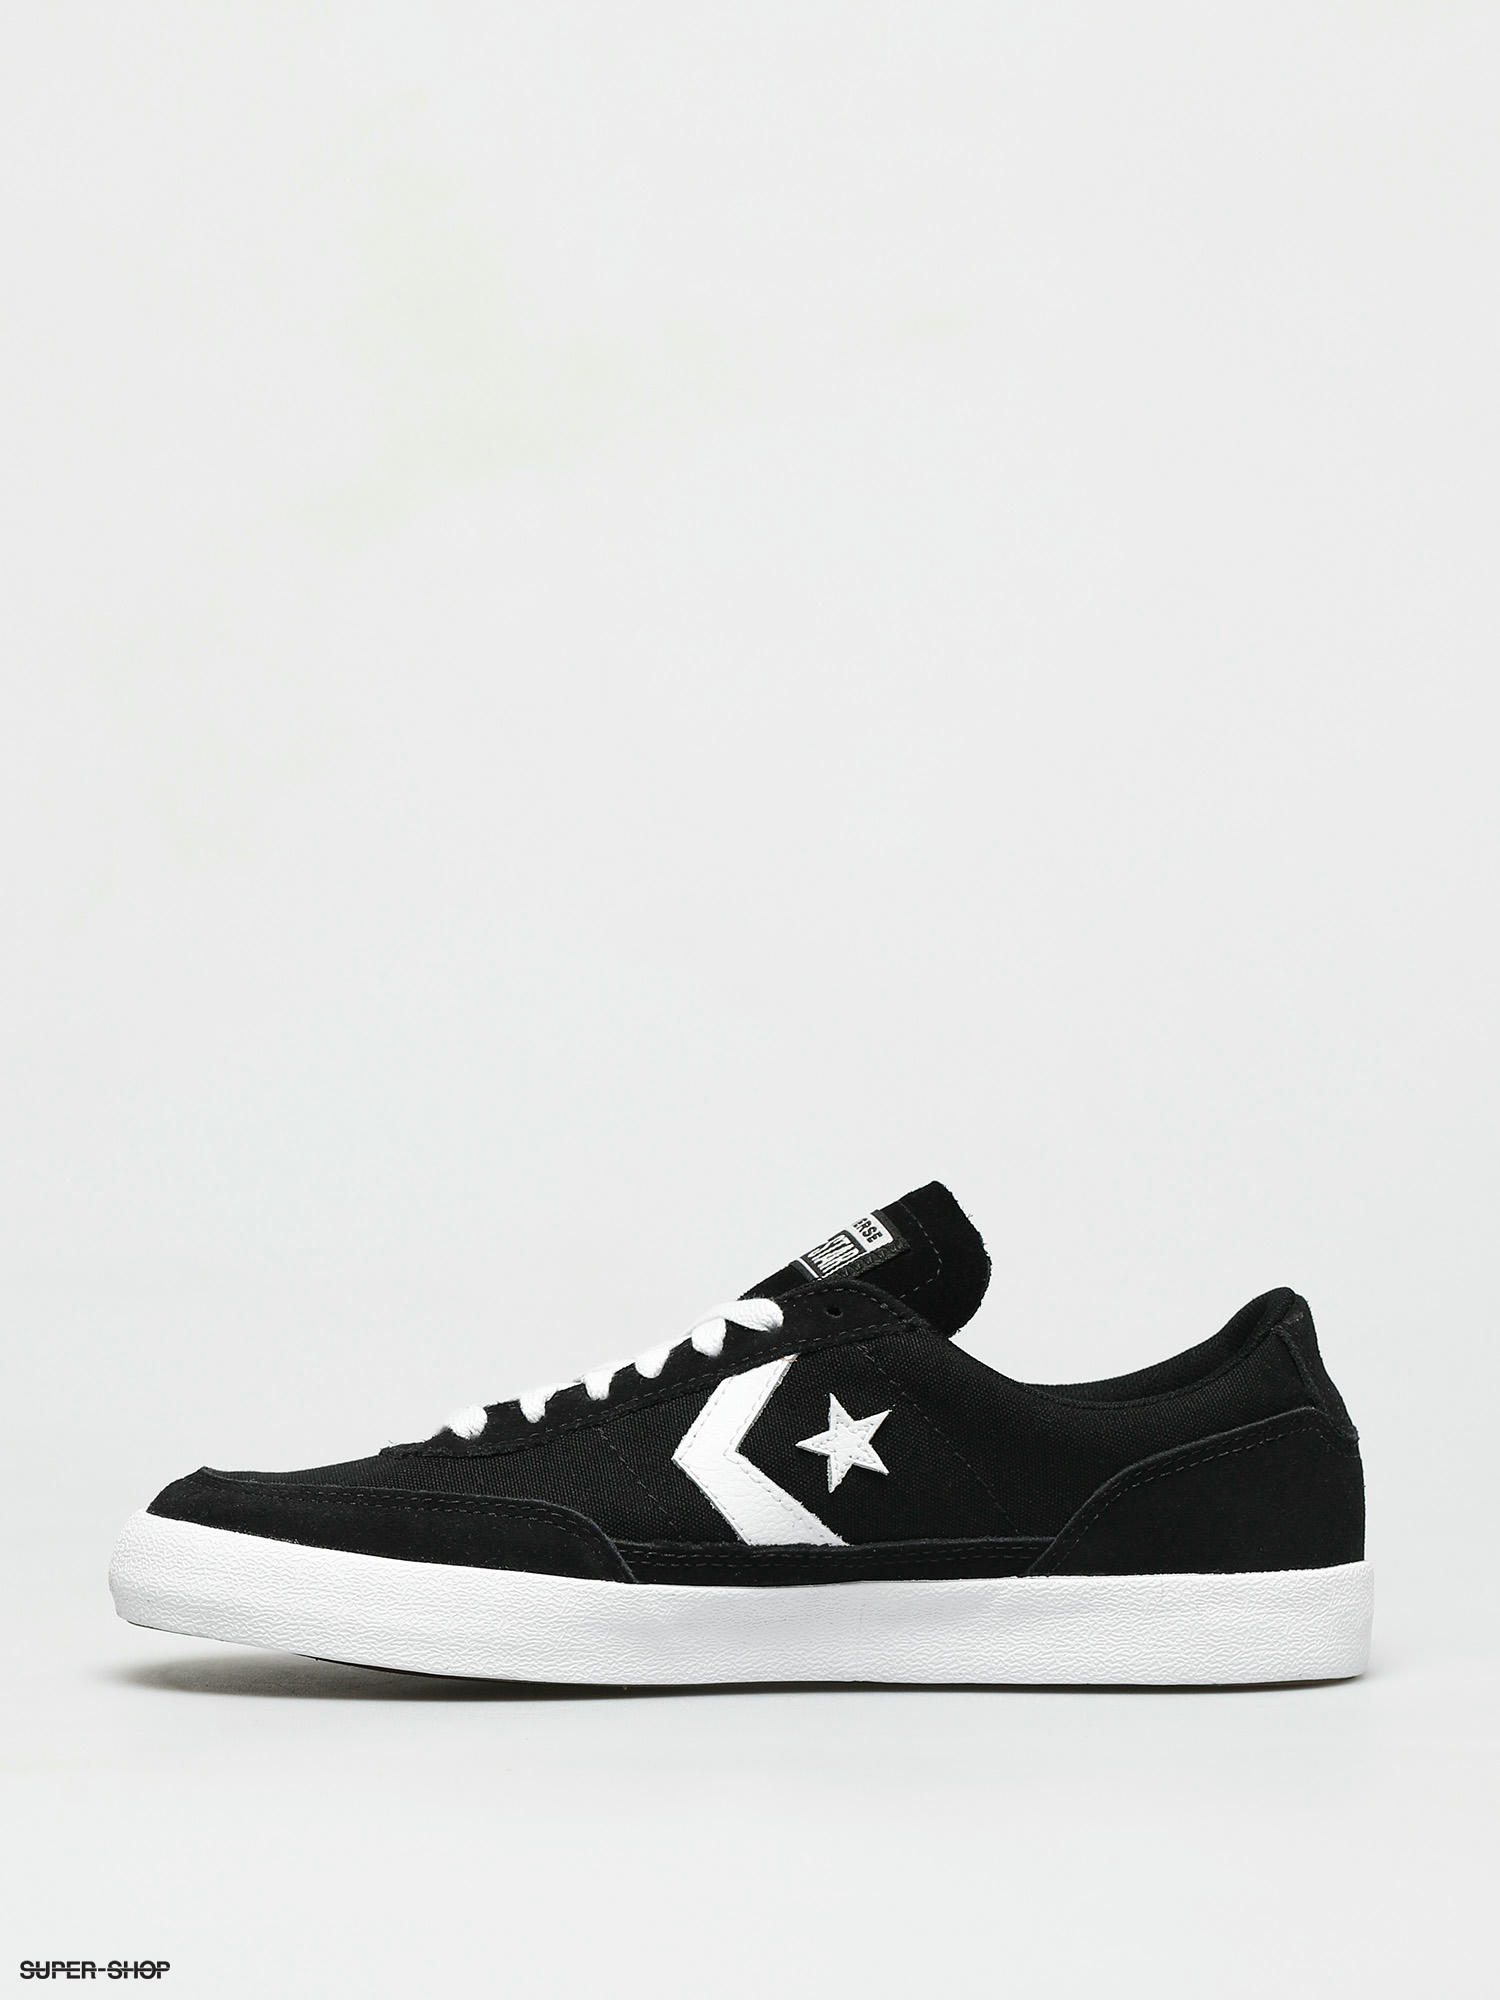 converse suede and leather net star classic black shoes